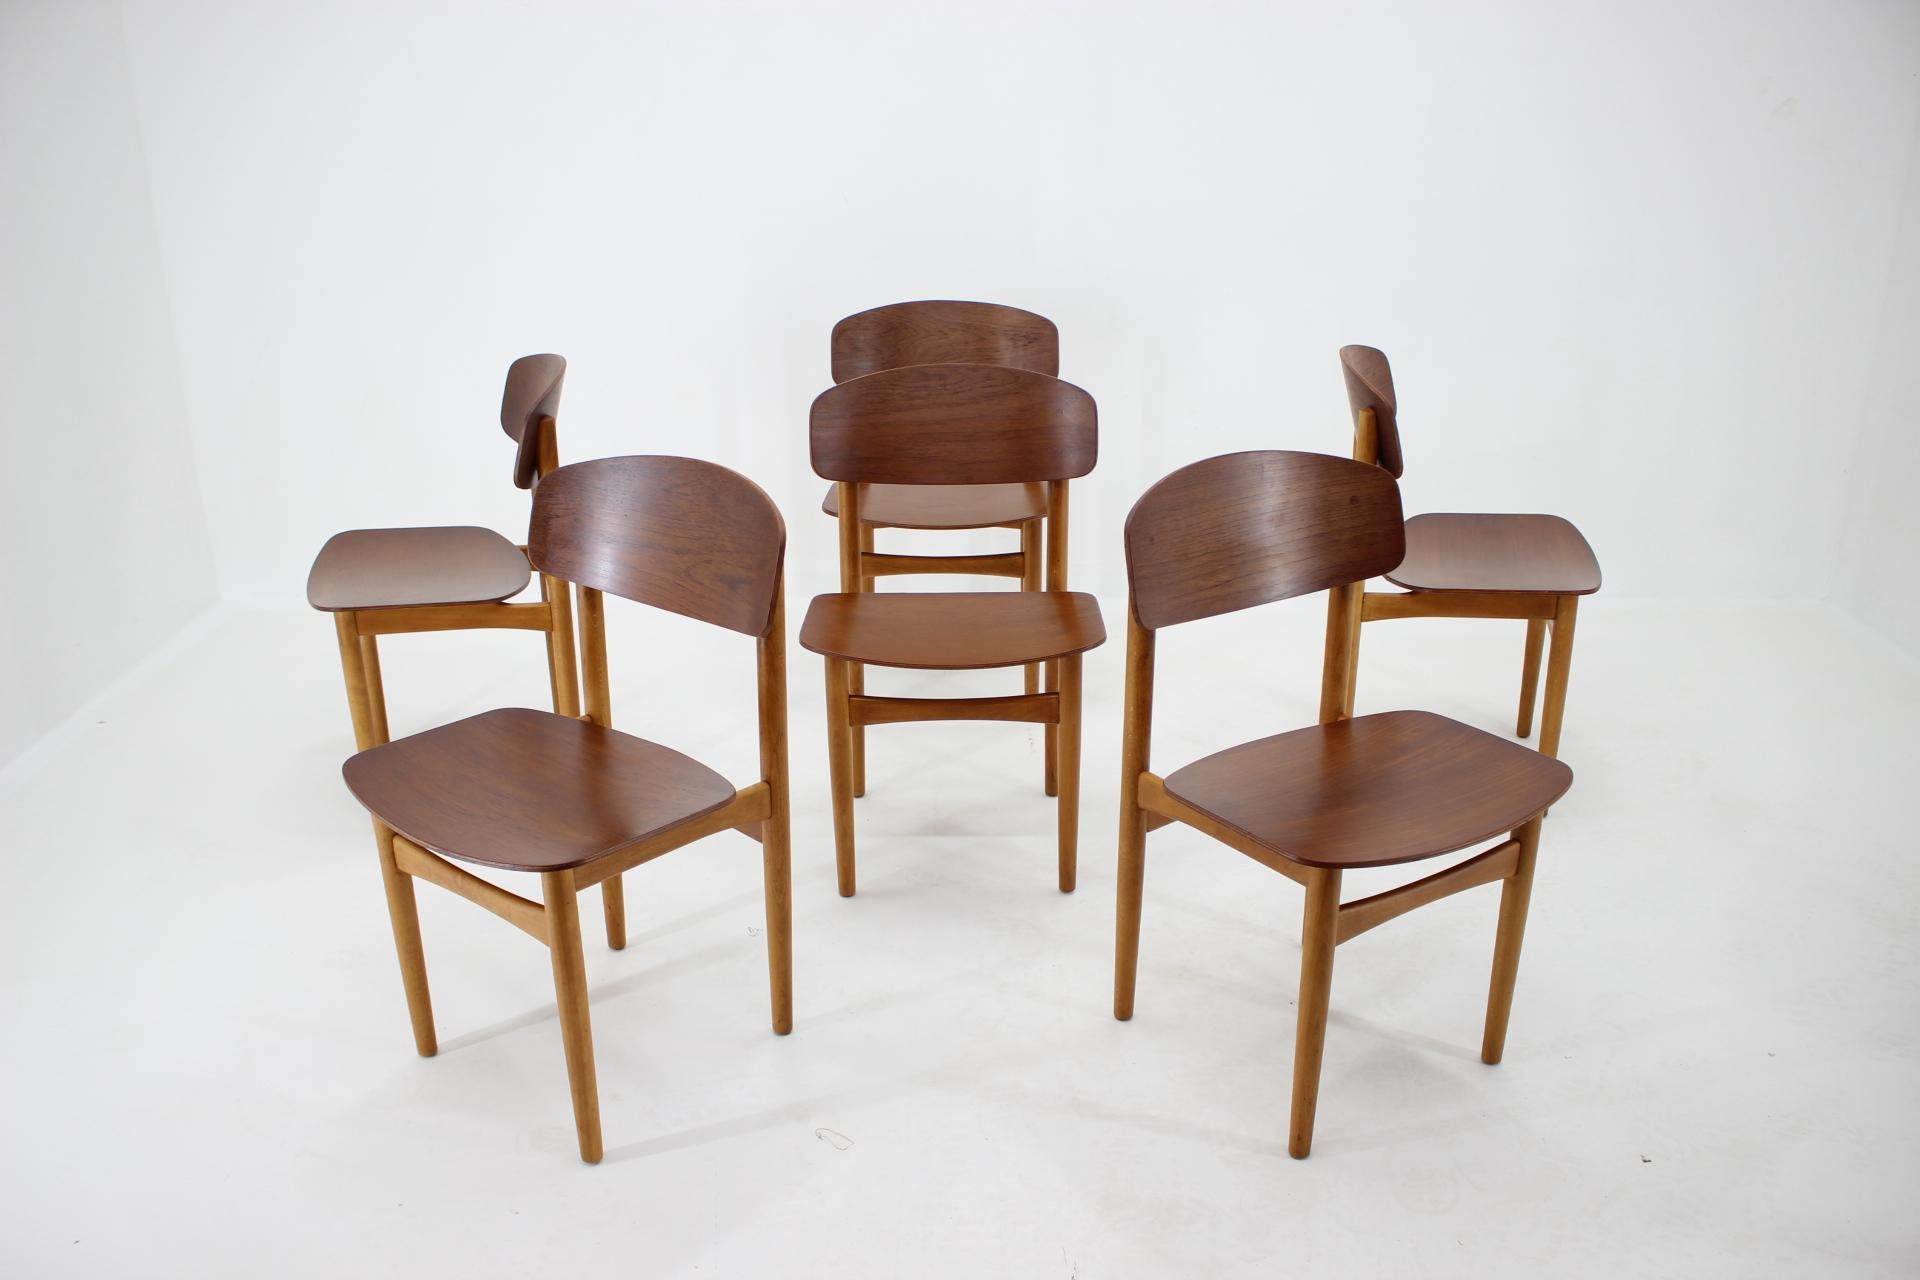 - The chairs have been carefully refurbished
- Height of seat 48 cm.